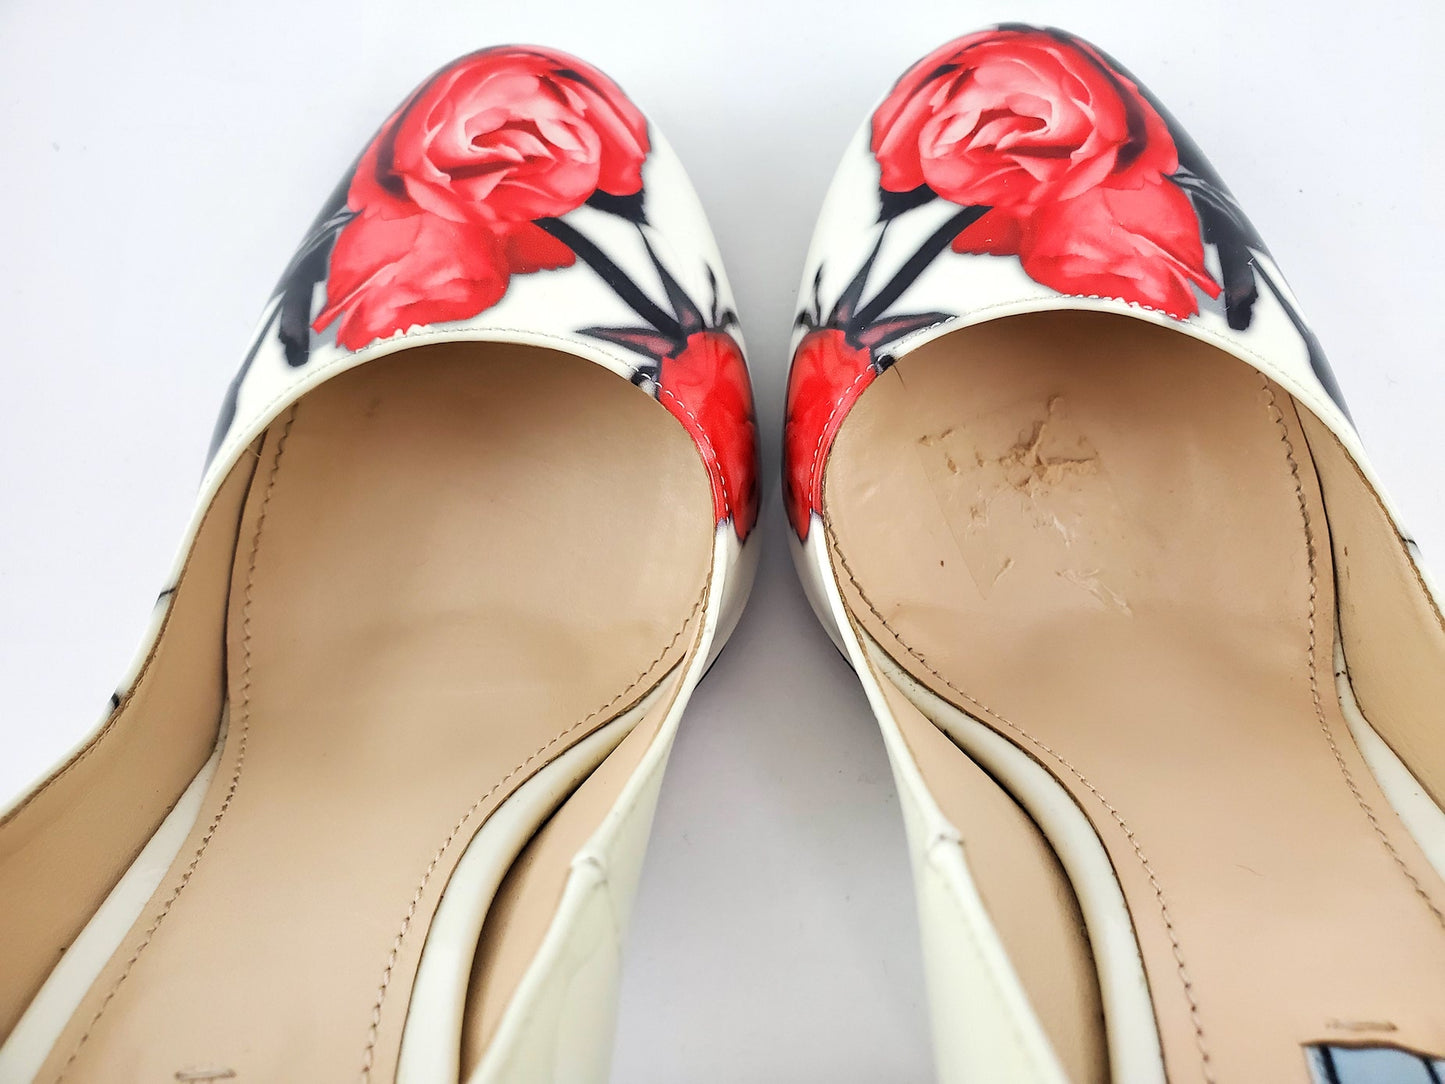 Prada Off White Floral Patent Leather Pumps 39